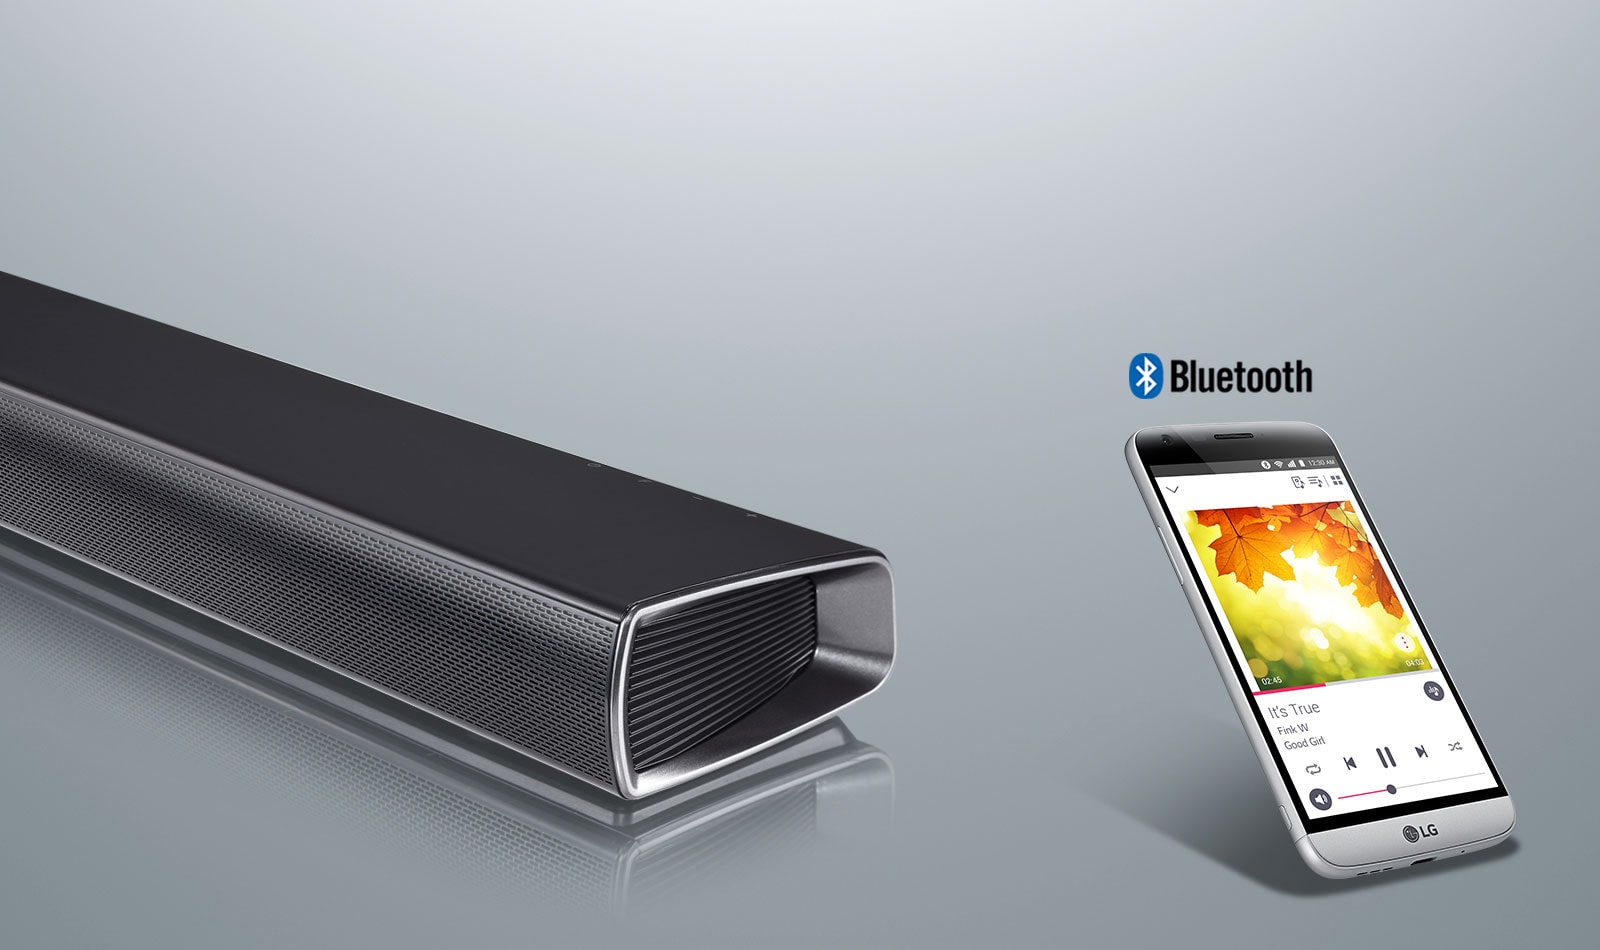 Bluetooth Stand-by, wake up your bar on demand1